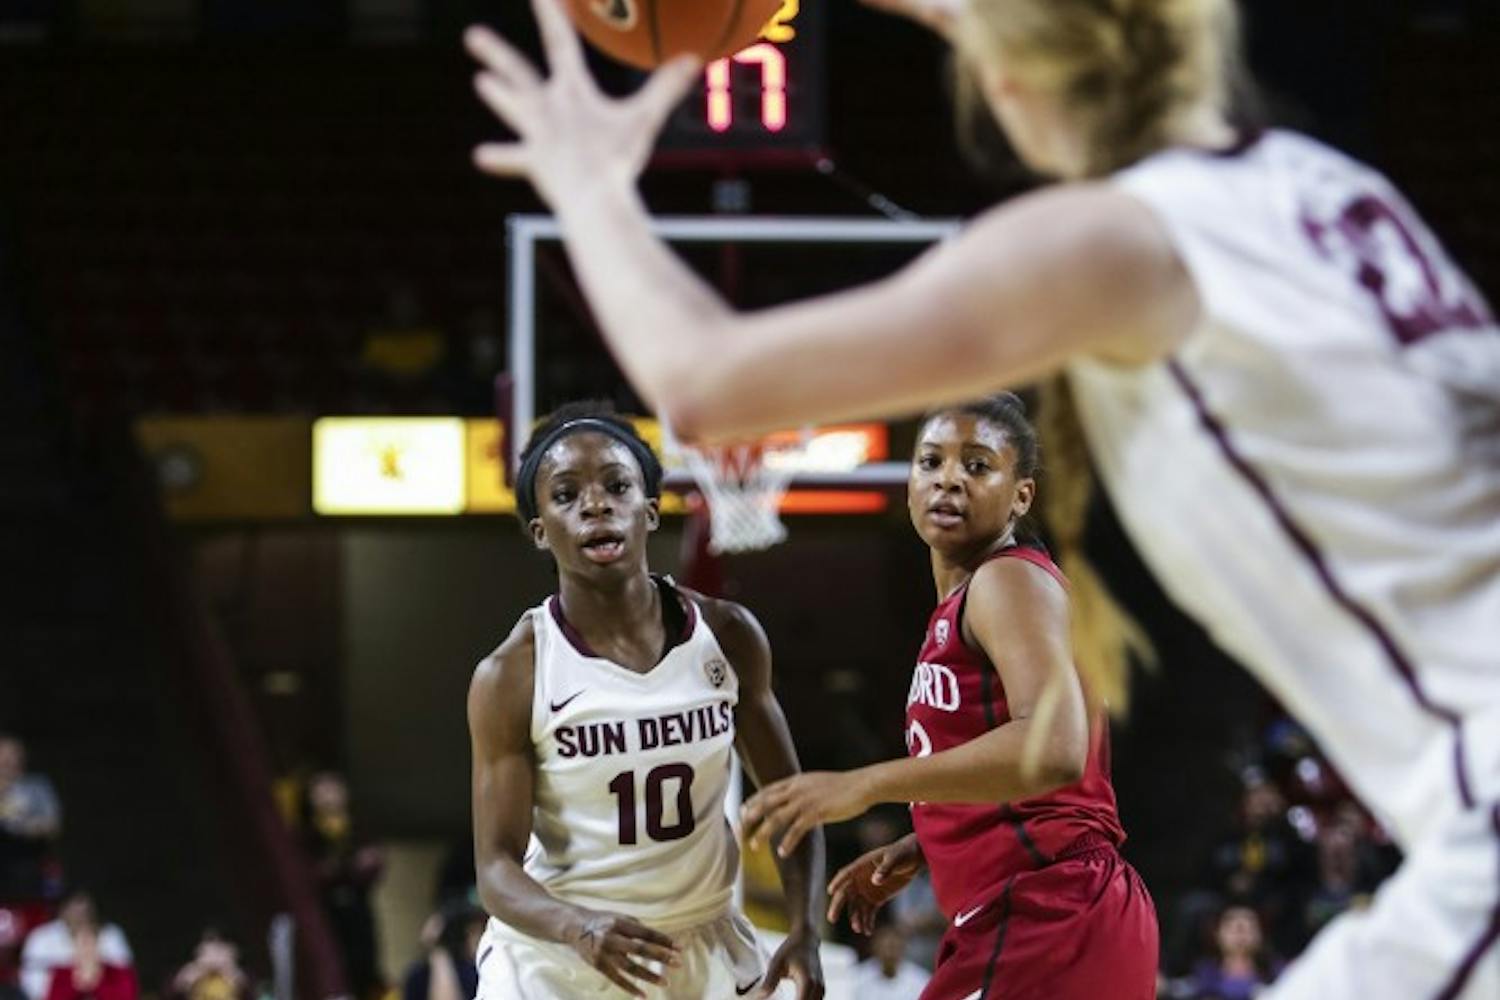 Hoops’ upset: ASU senior forward Becca Tobin goes up against WSU redshirt freshman guard Ireti Amojo during the Sun Devils’ 70-65 loss on Thursday. Mistakes ultimately doomed the Sun Devils, who trailed for the vast majority of the game. (Photo courtesy of Beth Easterbrook)